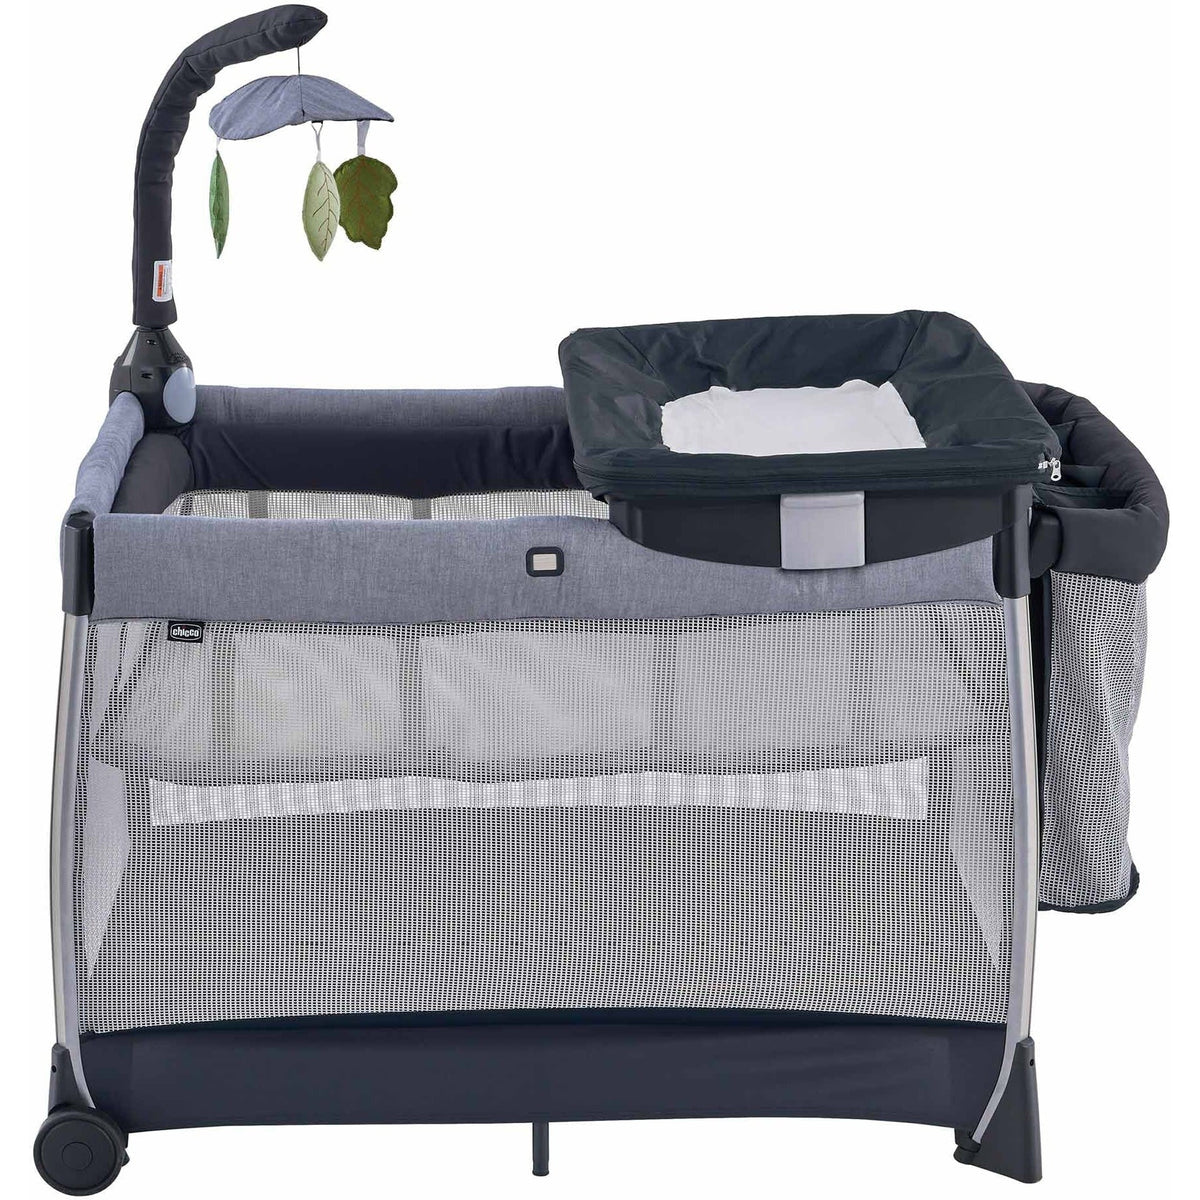 Chicco Lullaby Primo All-in-One Portable Playard